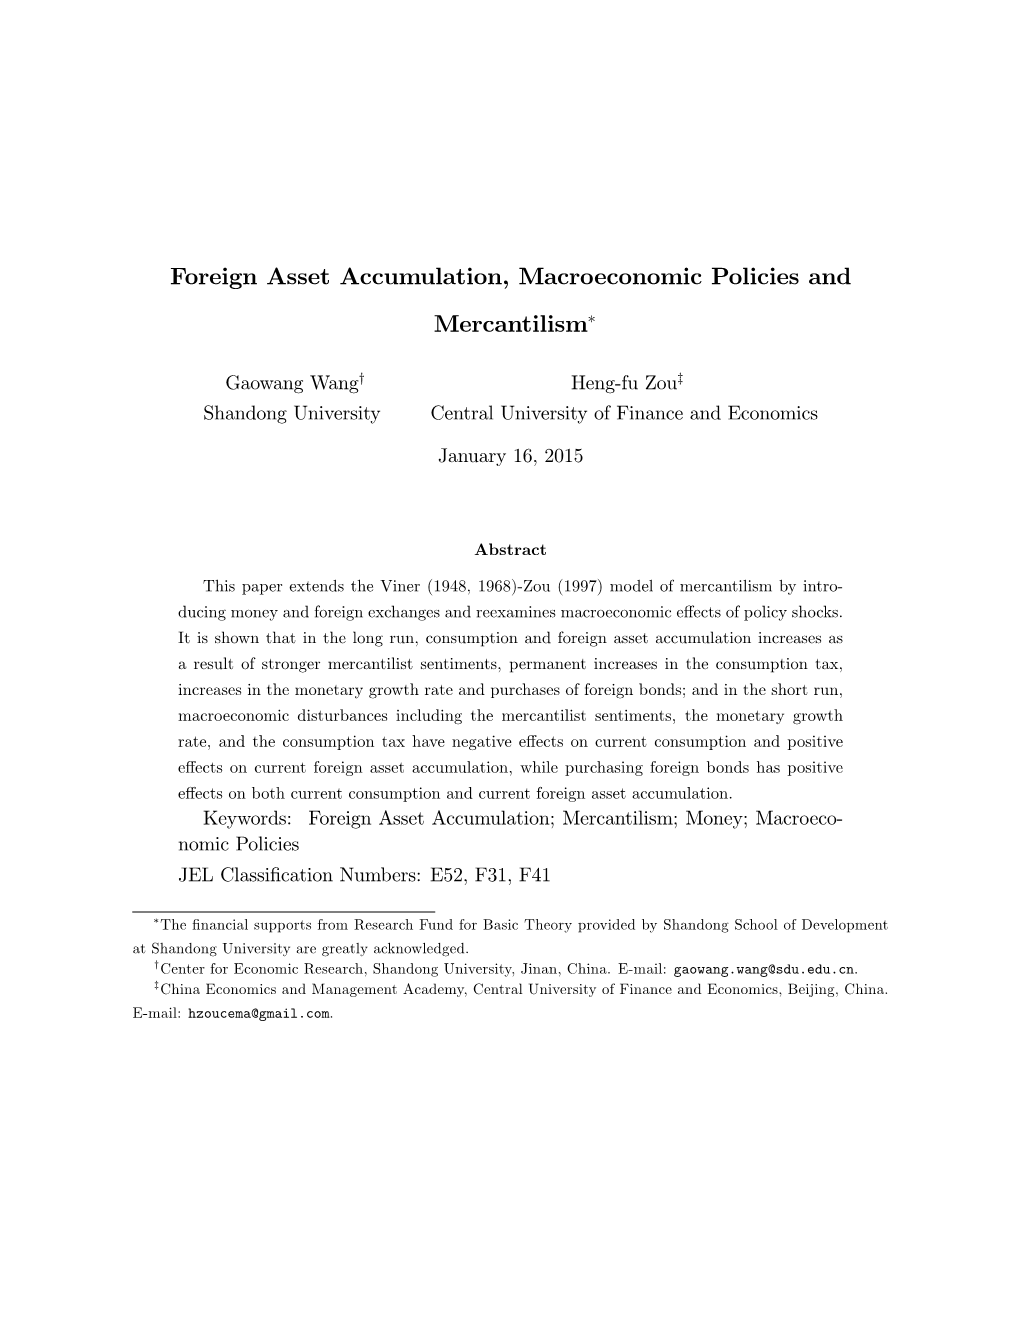 Foreign Asset Accumulation, Macroeconomic Policies and Mercantilism∗